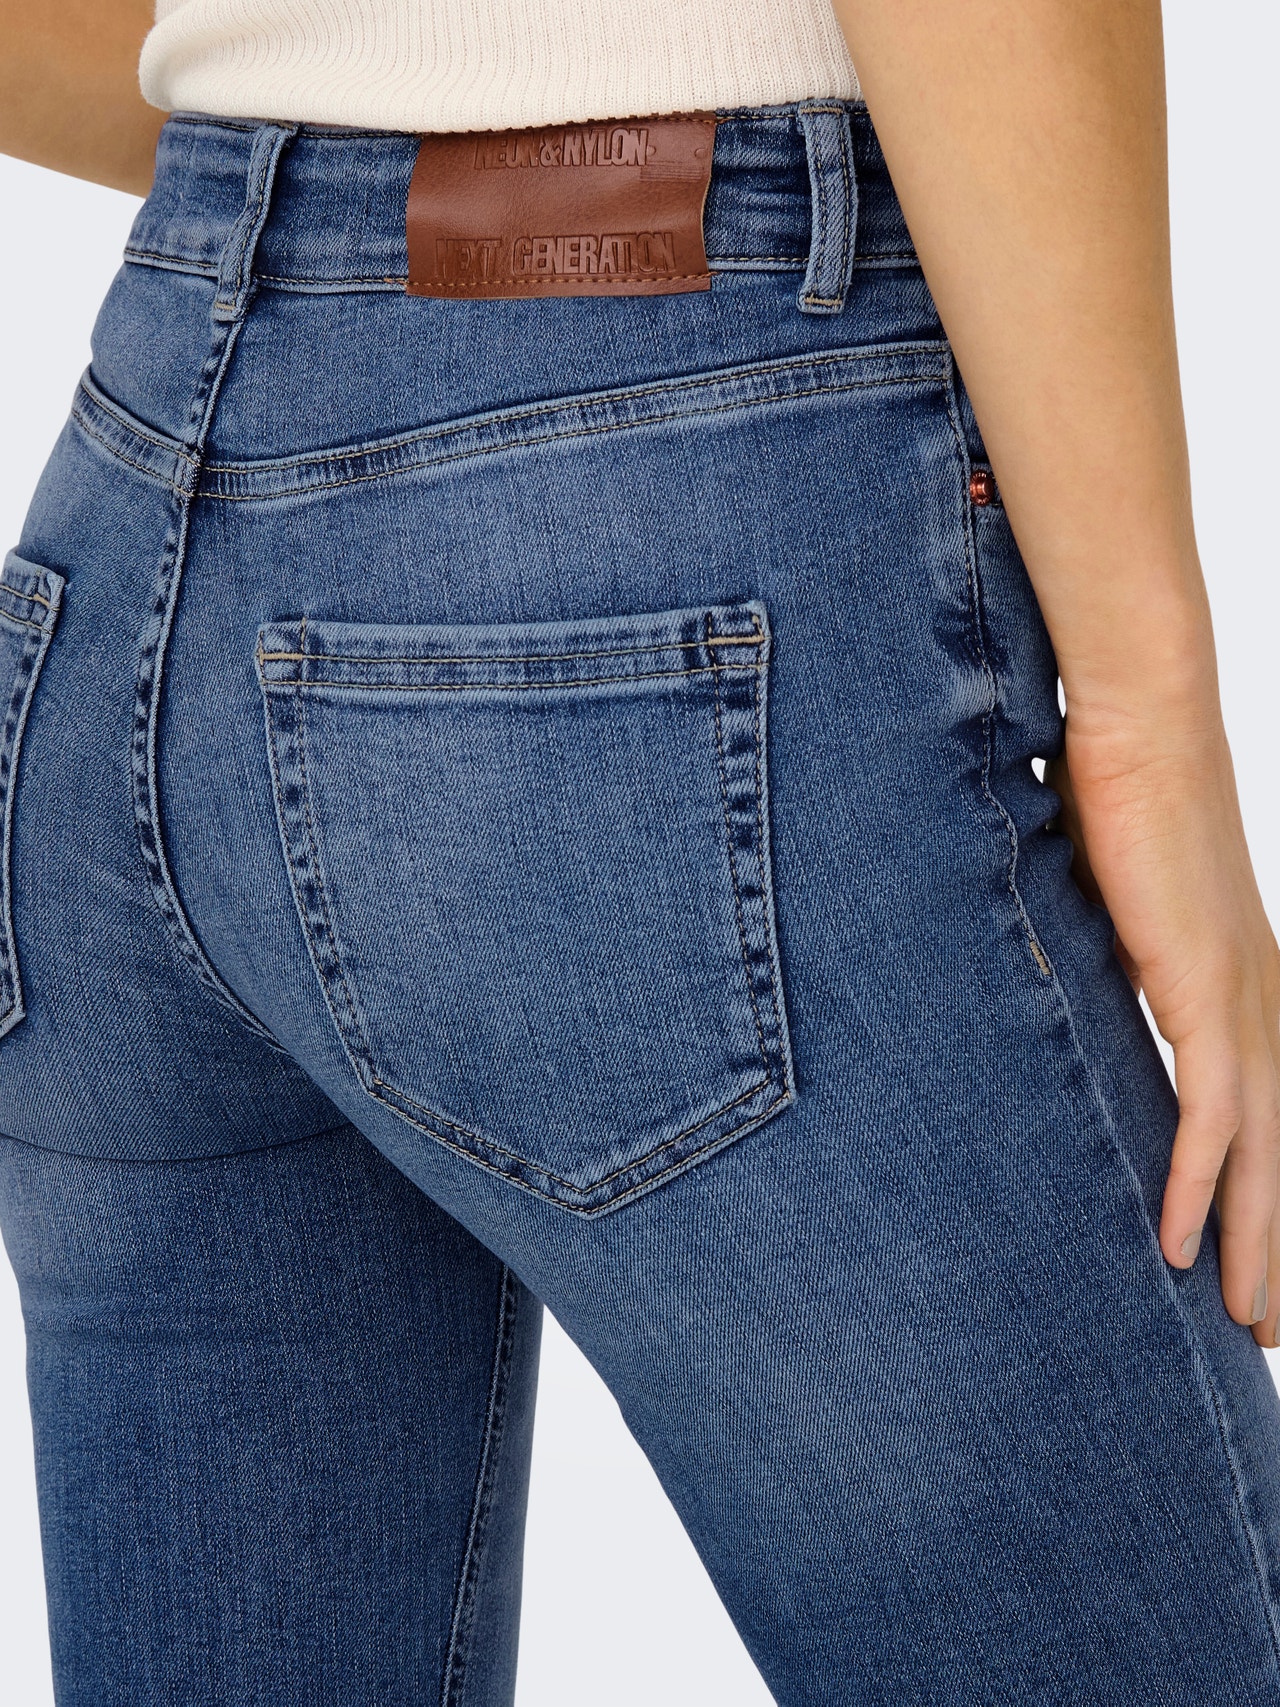 https://images.only.com/15267036/3971957/007/only-flaredfitmidwaistjeans-blue.jpg?v=9cc8ac780df9113b35bea1e4297e0e42&format=webp&width=1280&quality=90&key=25-0-3